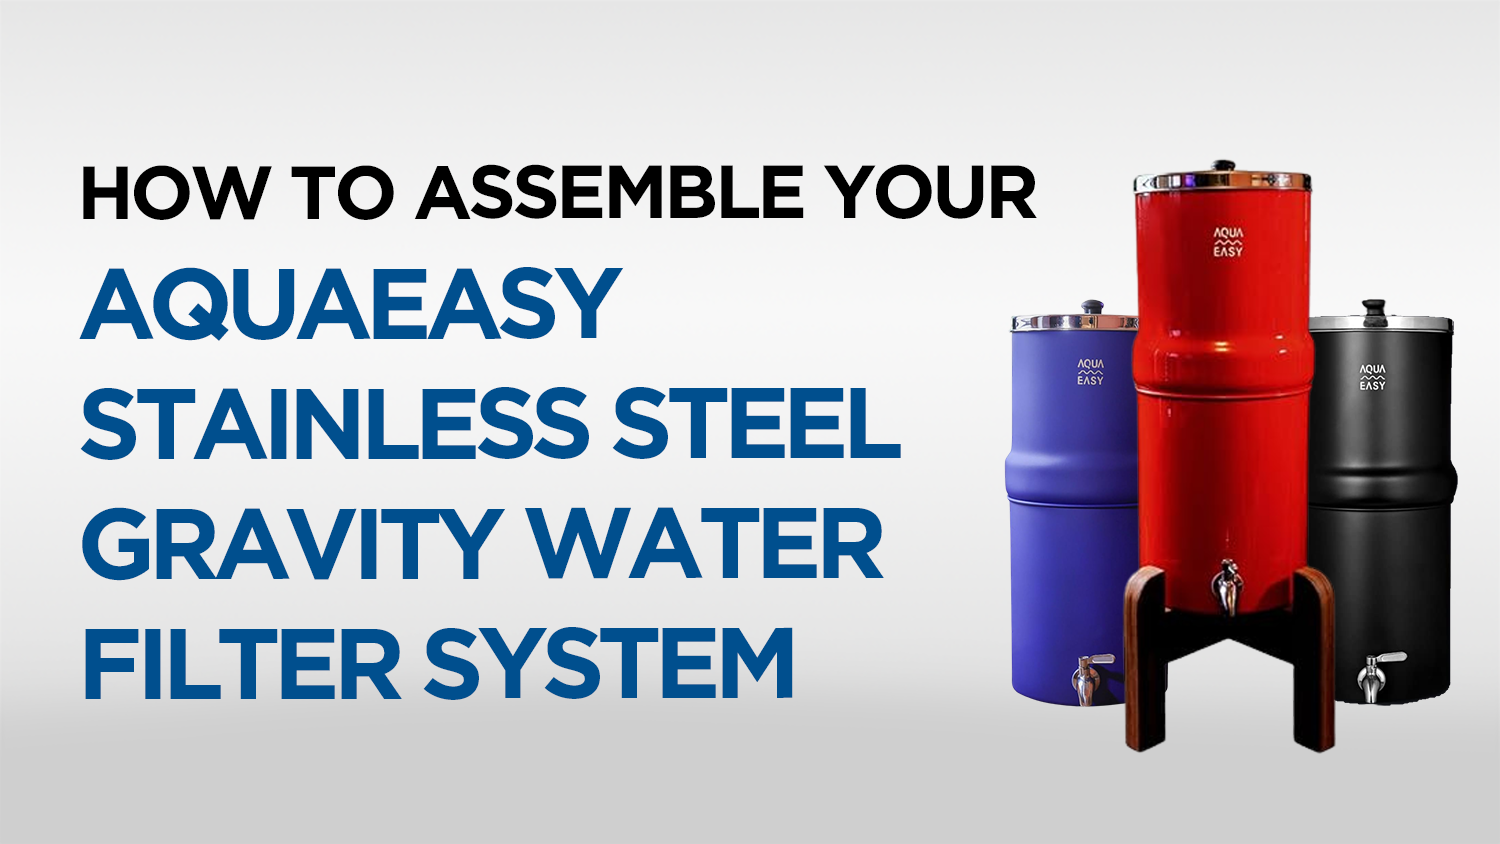 How to Assemble Your AquaEasy Stainless Steel Gravity Water Filter System